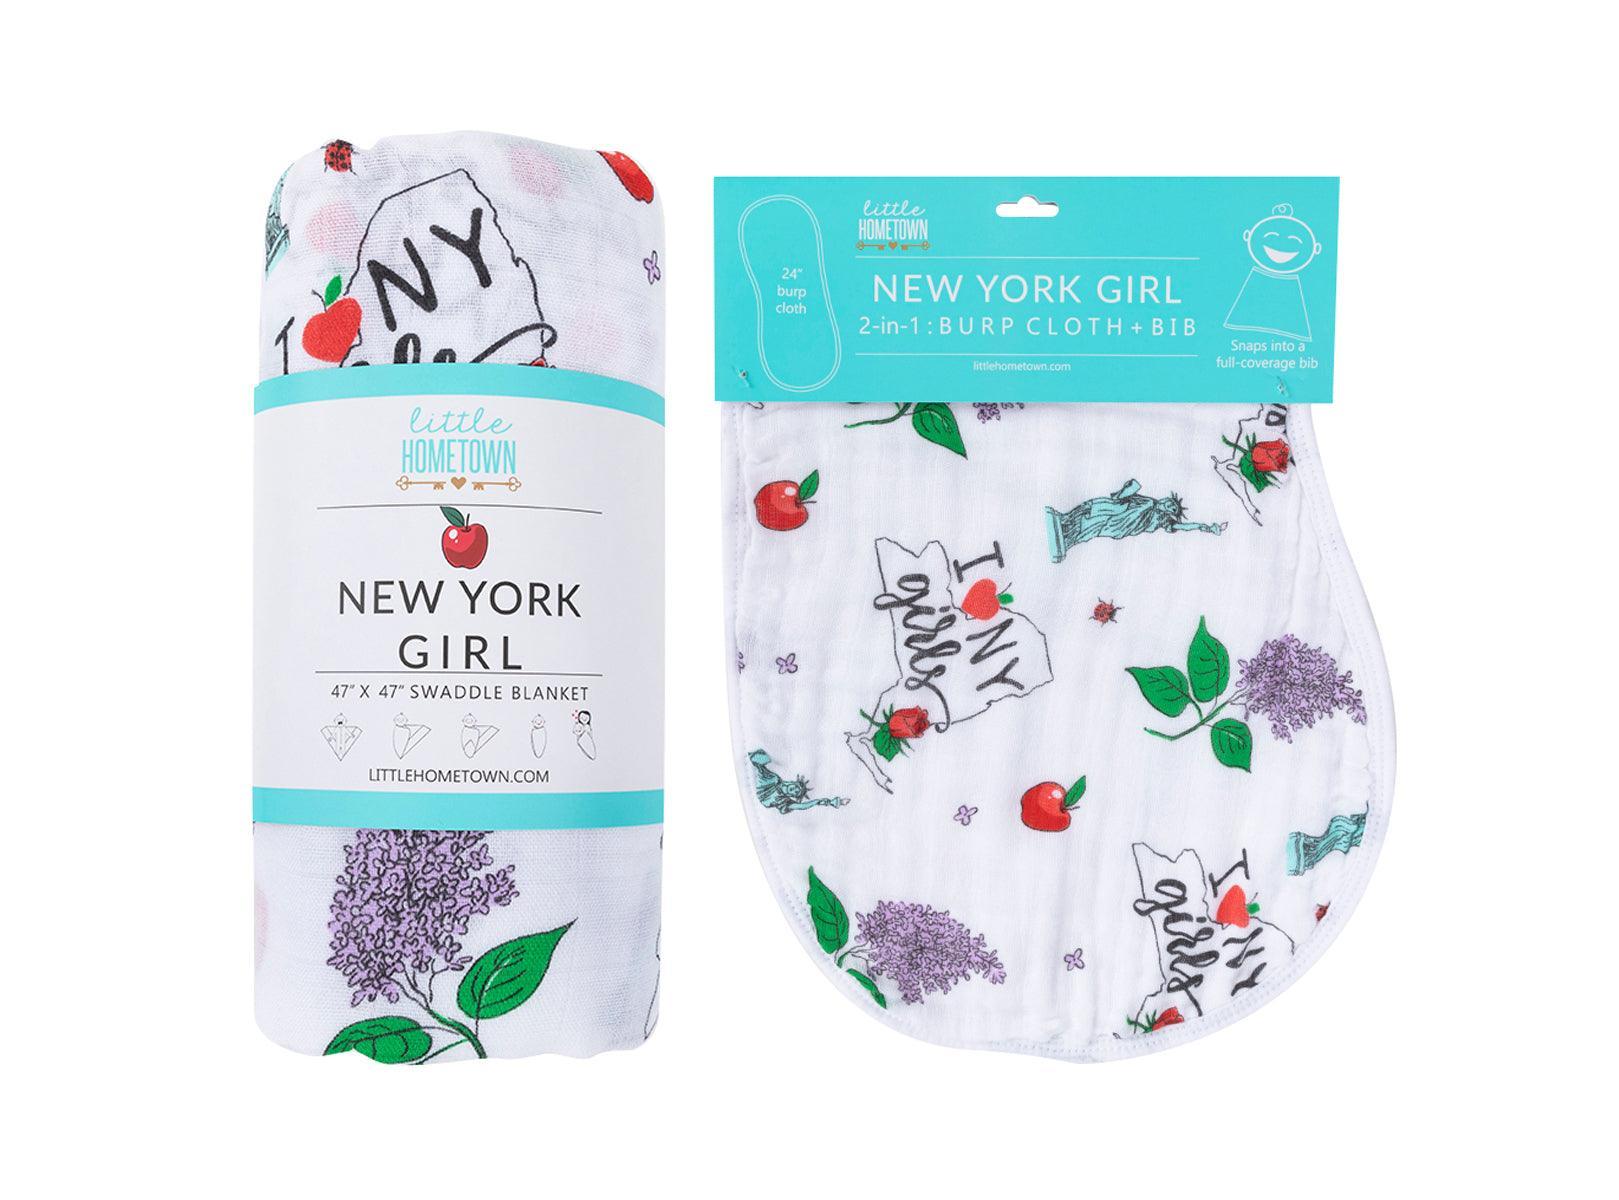 New York-themed baby gift set with muslin swaddle blanket and burp cloth, featuring iconic city landmarks.